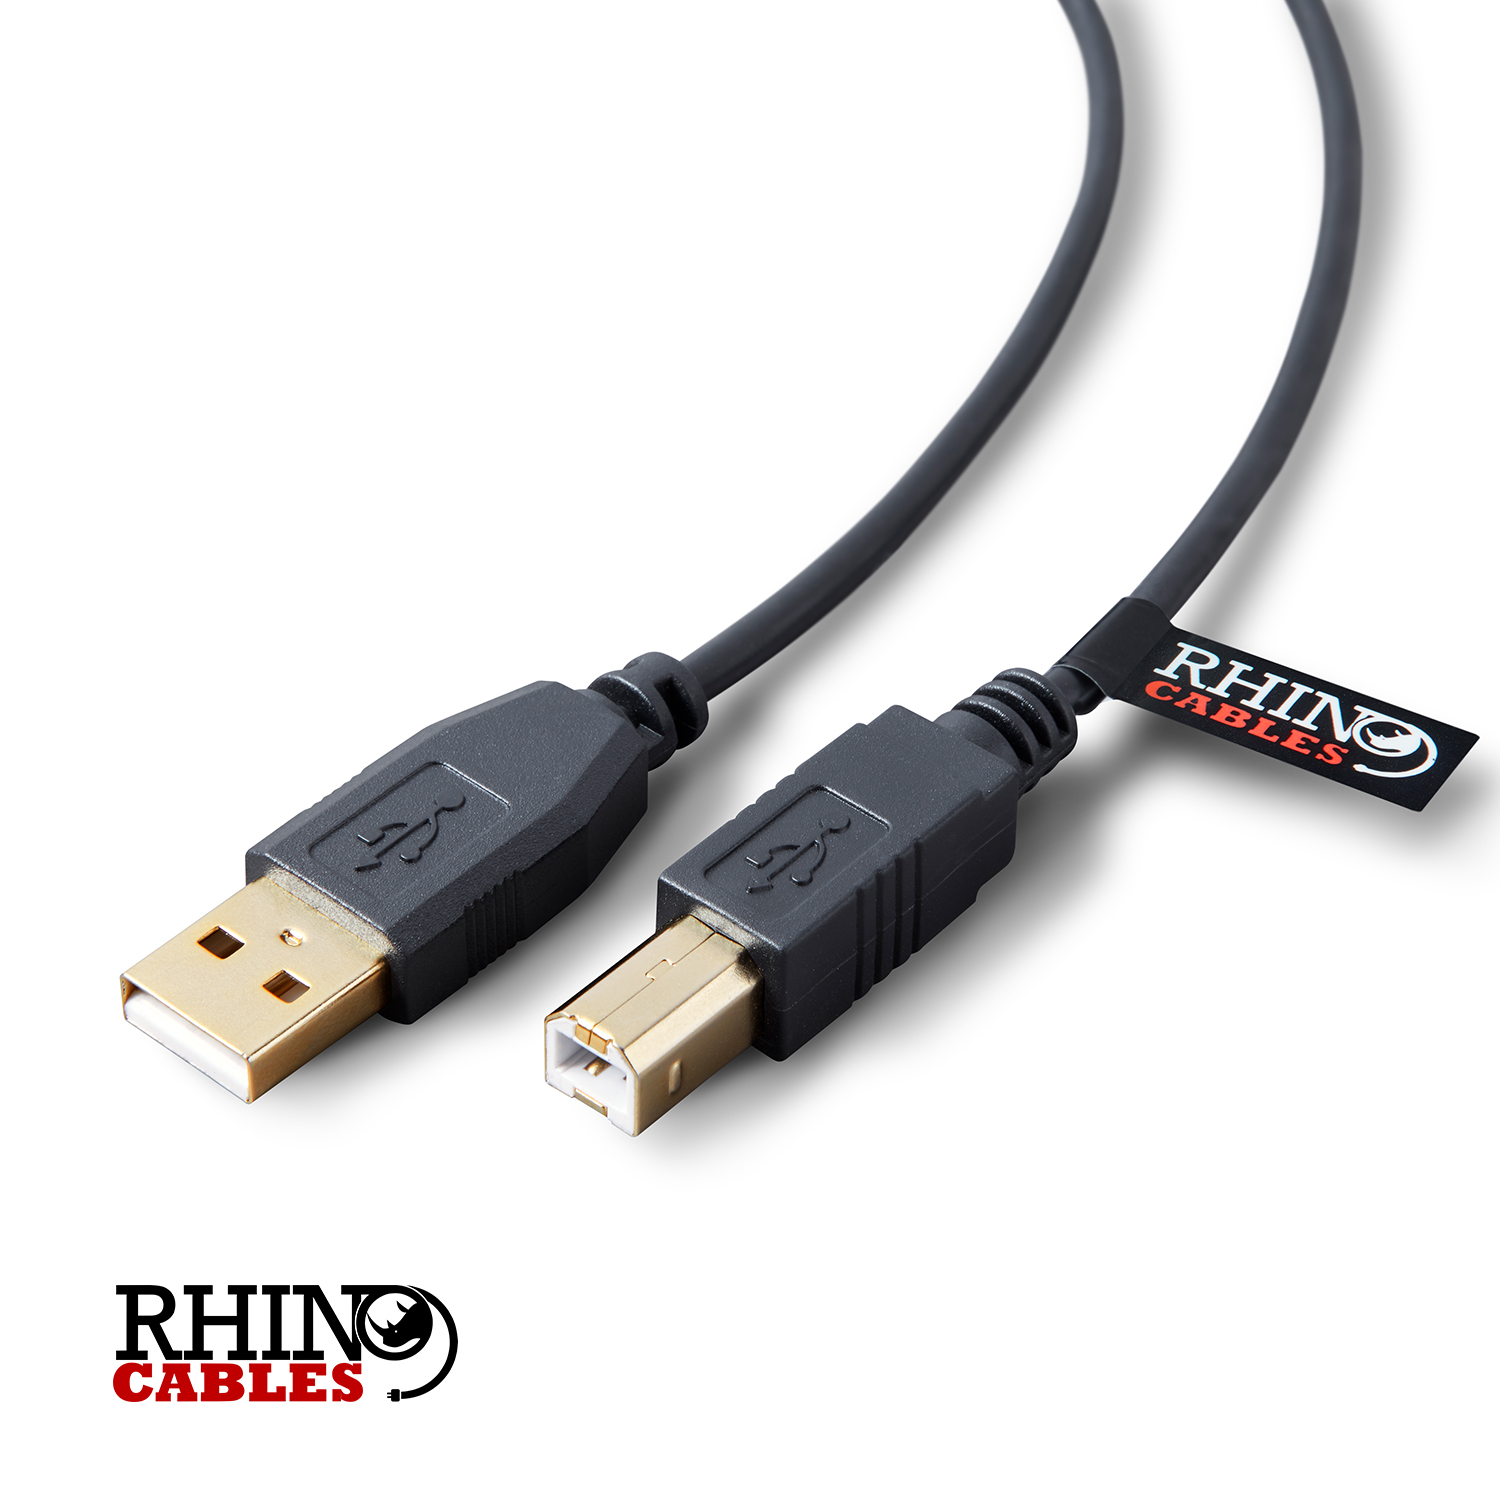 Resultat Gentage sig Betydelig USB 2.0 Gold HQ A to B PRINTER CABLE - rhinocables.co.uk